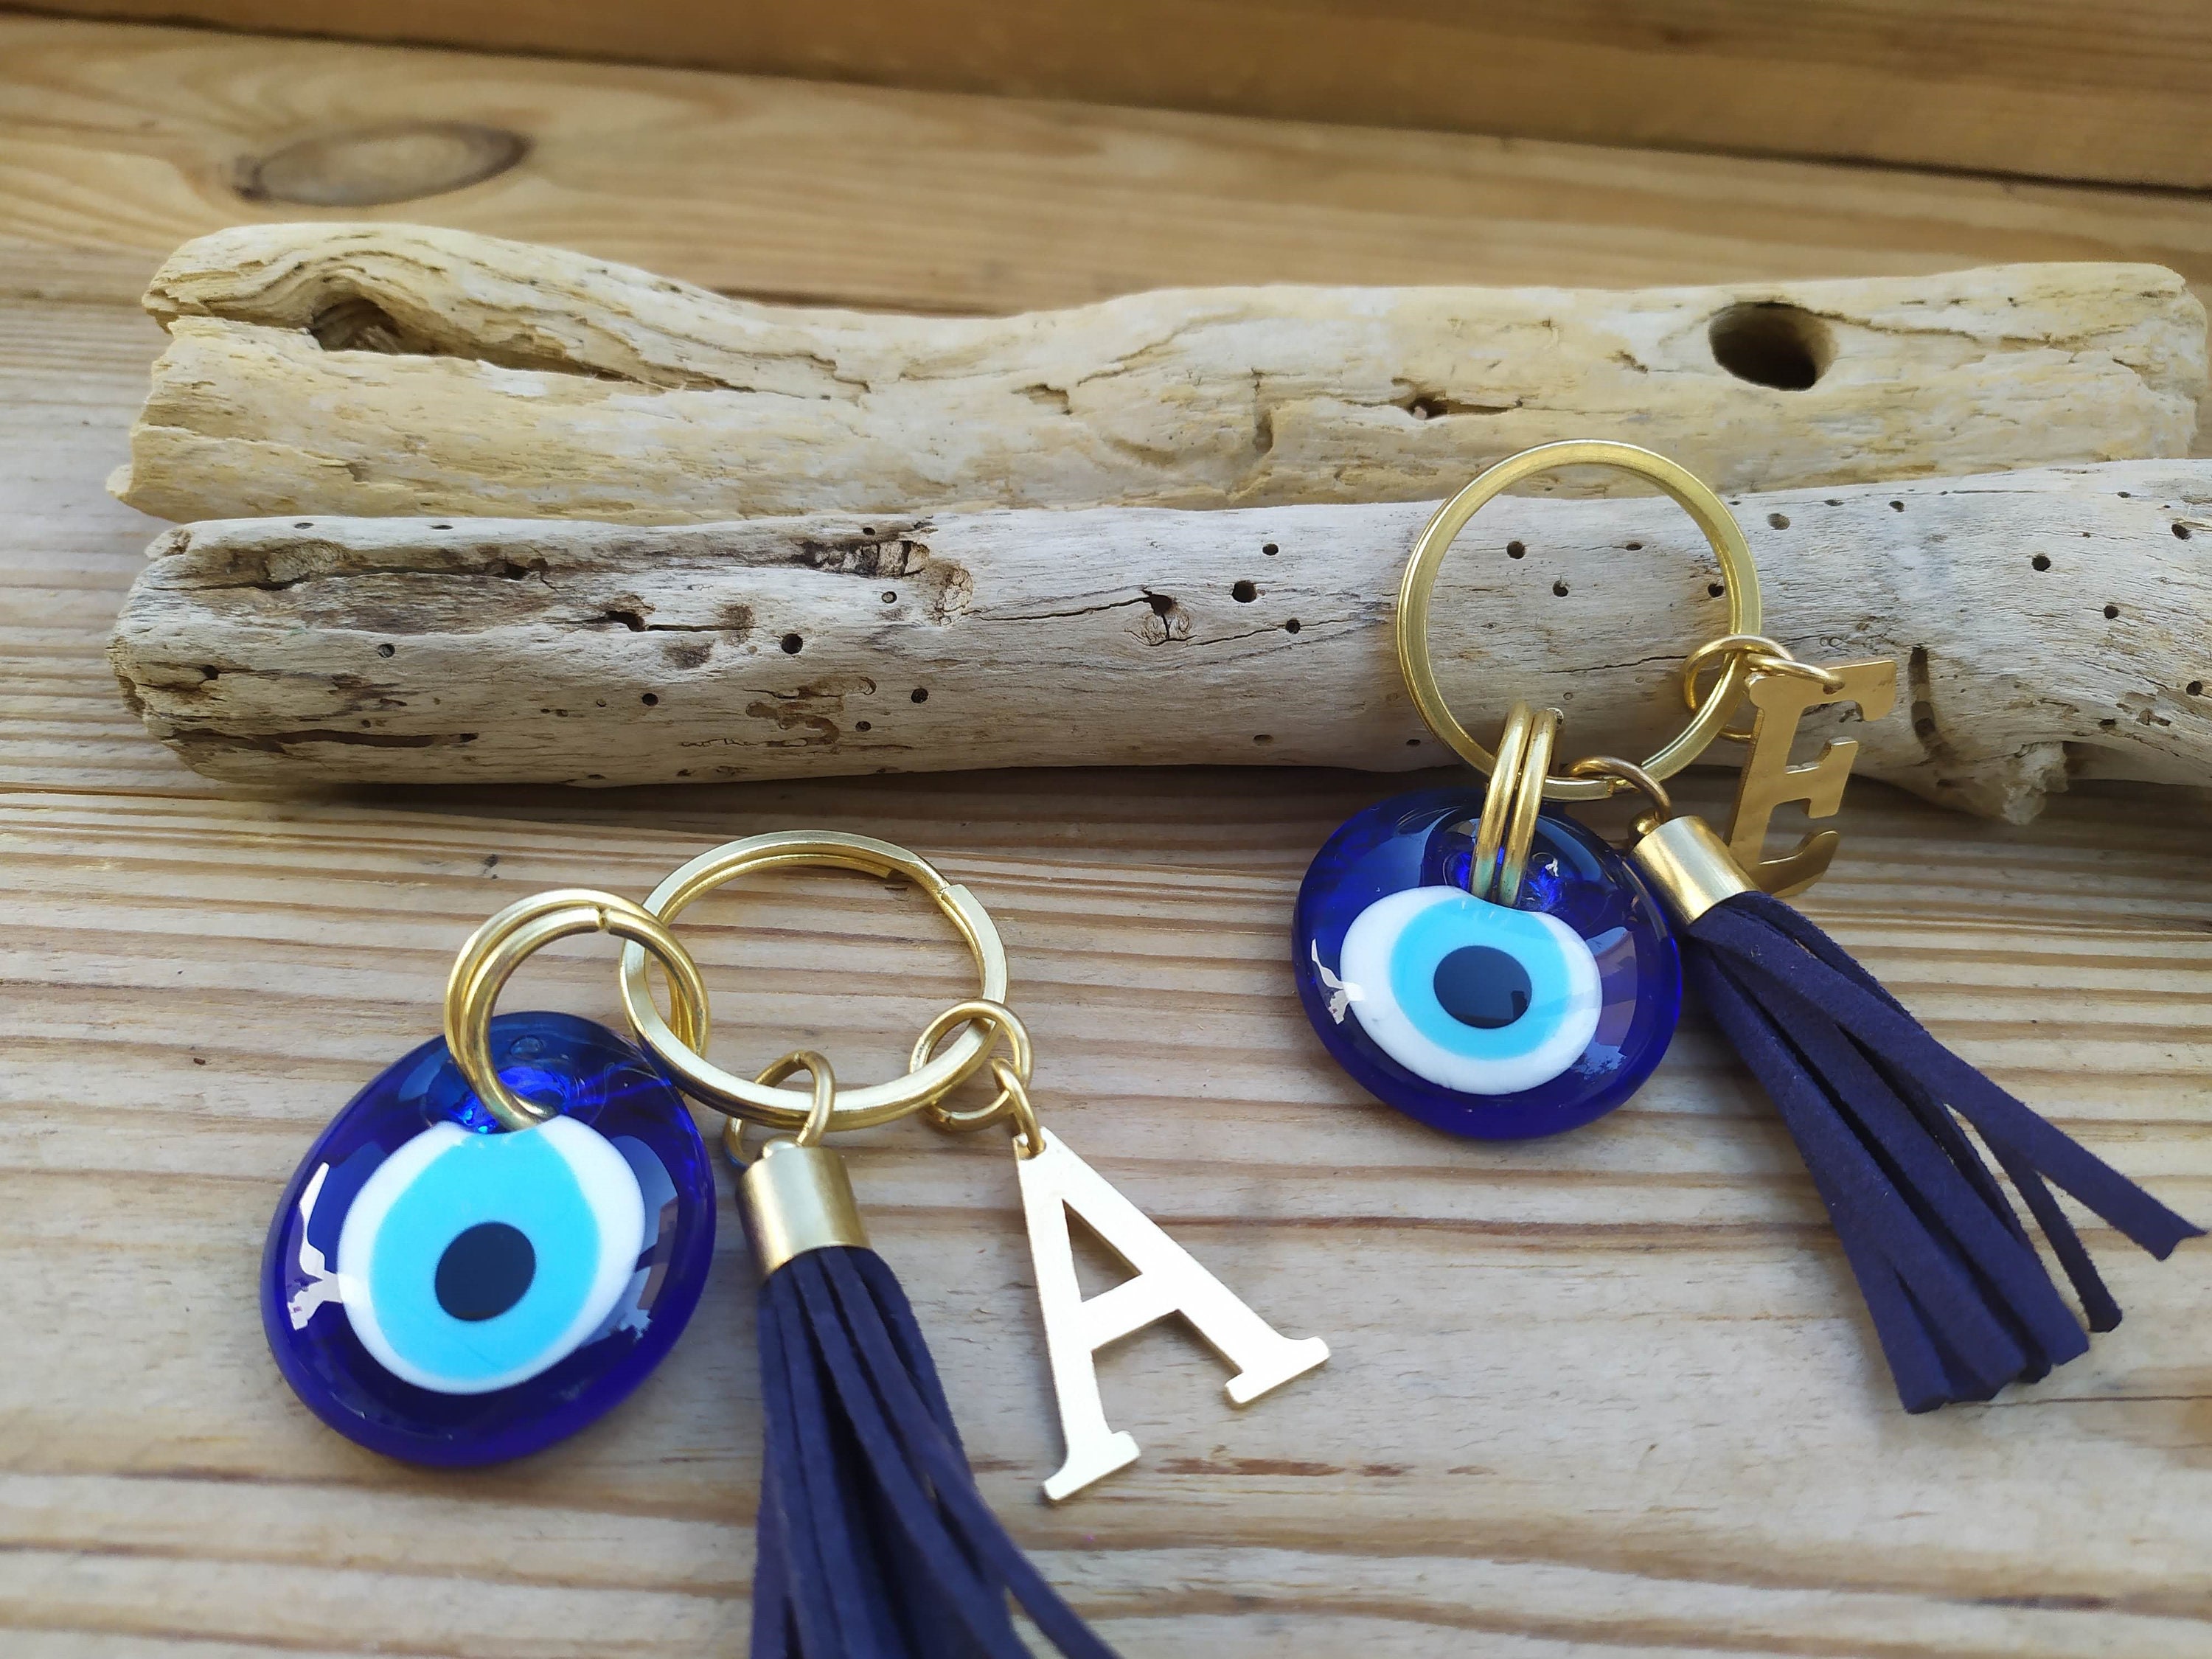 ARTISKRITI Evil Eye Keychain For Girls for Purse, Bike, Car, Mobile,  Gifting With Metal Key Ring Set of 2, Silver Angel and Peacock